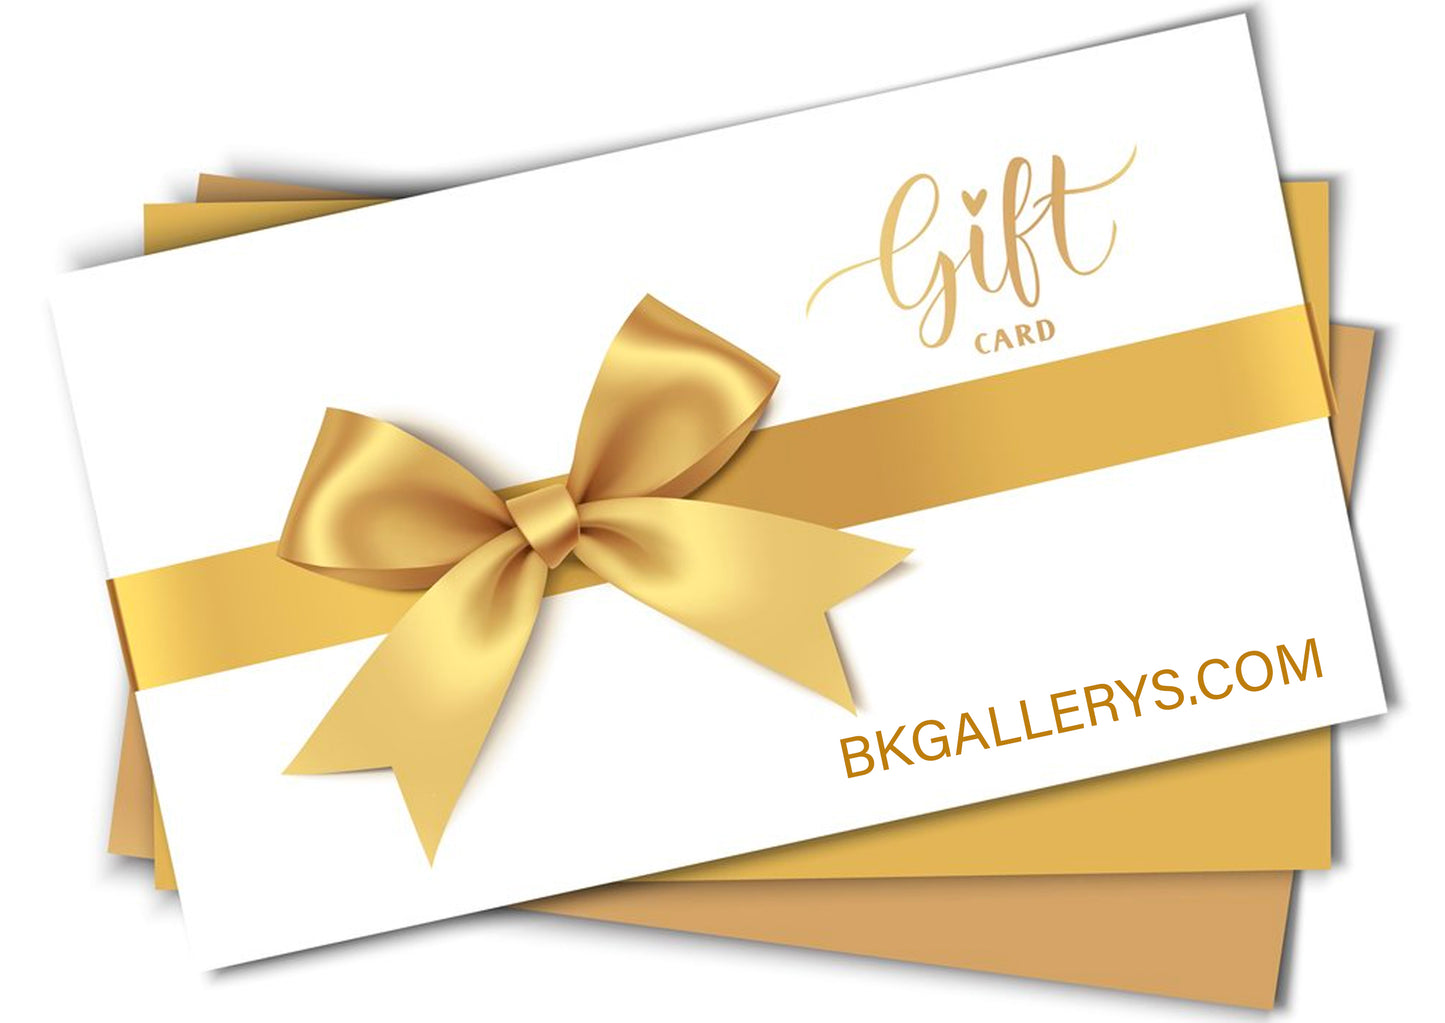 BKGALLERYS GIFT CARD